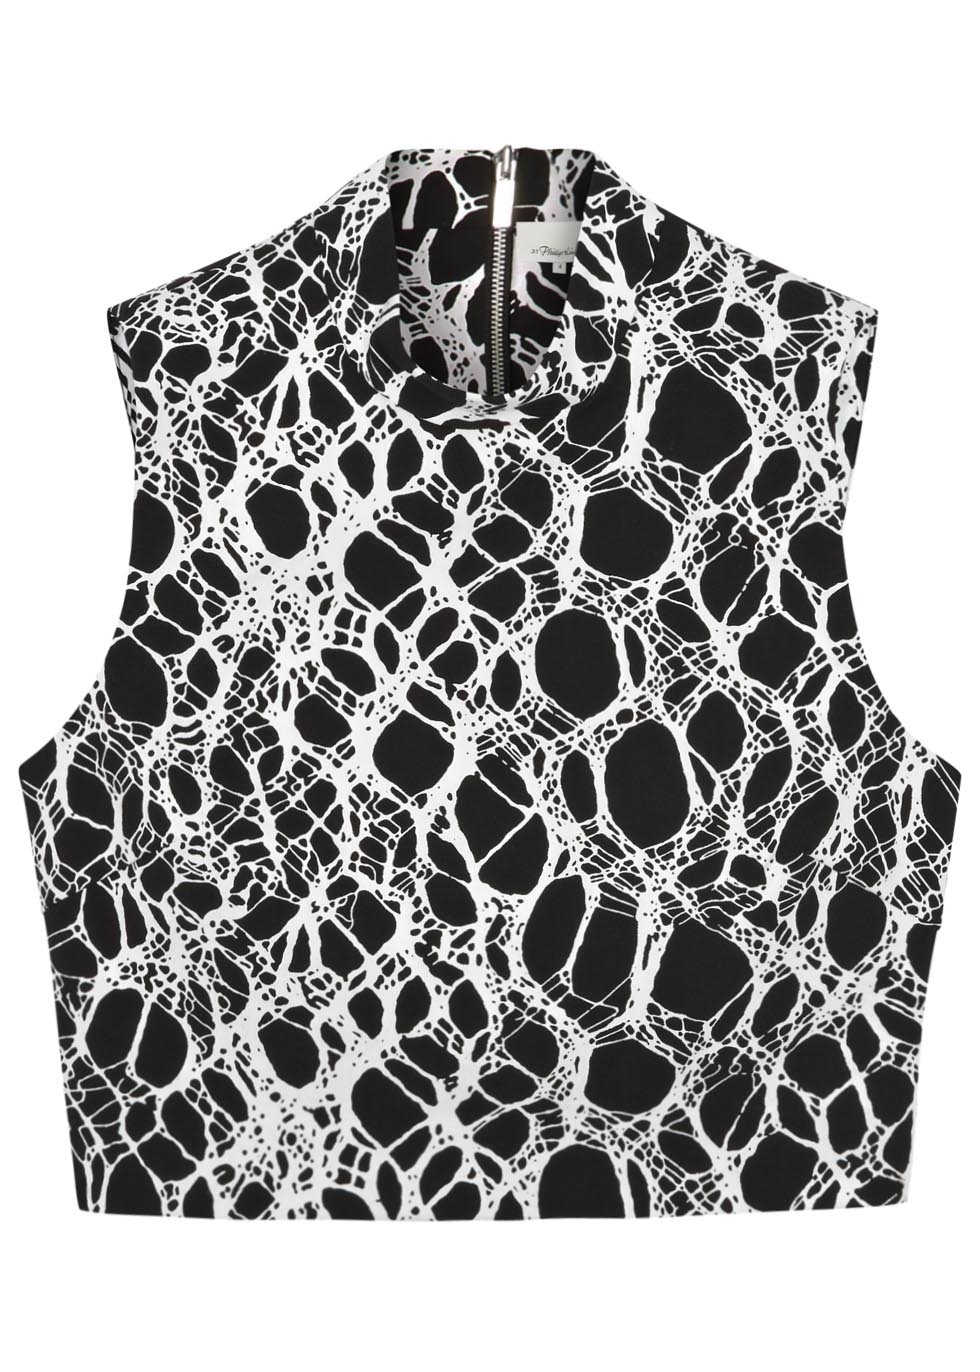 Aisling monochrome cropped printed top